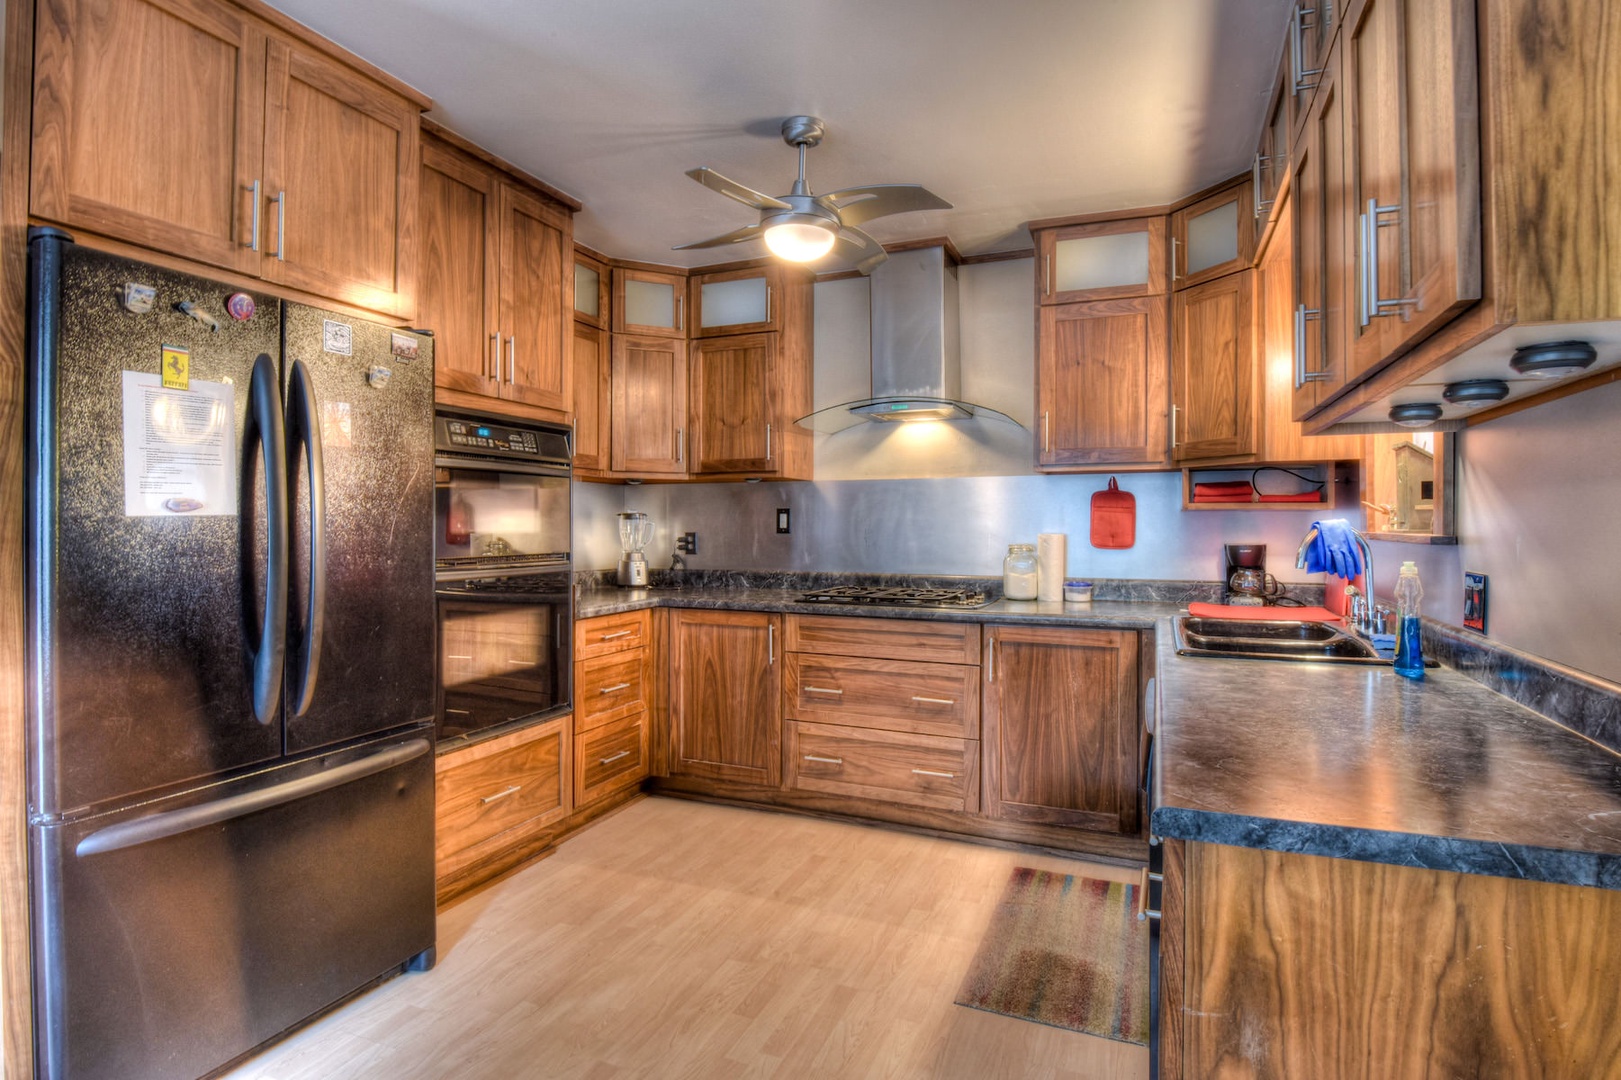 Modern kitchen w/ toaster, drip coffee pot, blender and more!